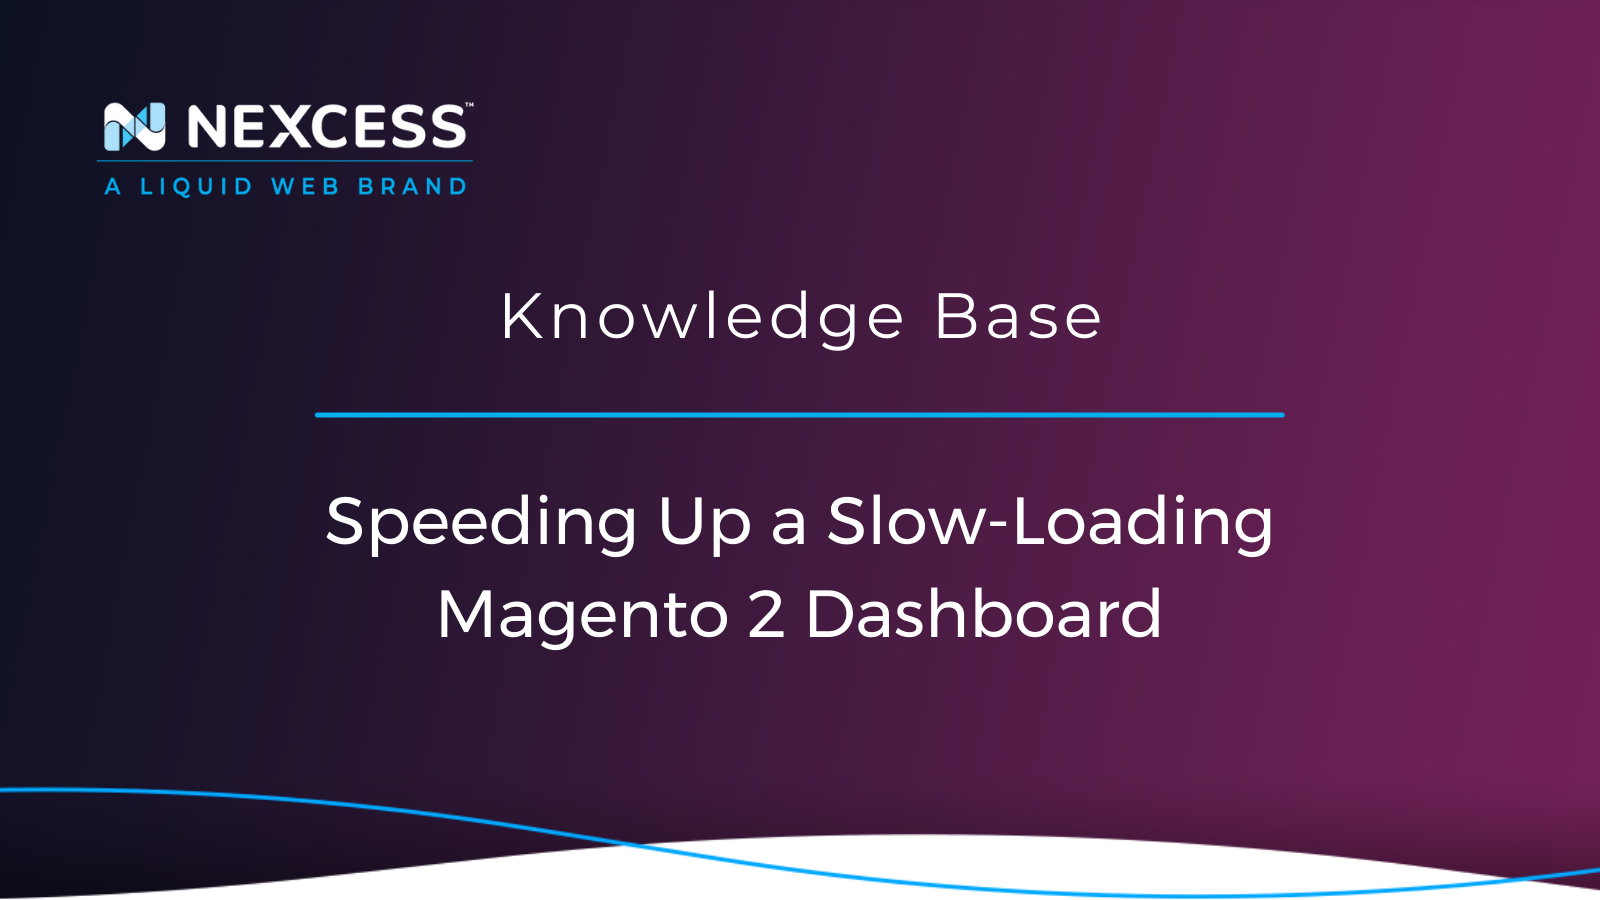 Speeding Up a Slow-Loading Magento 2 Dashboard